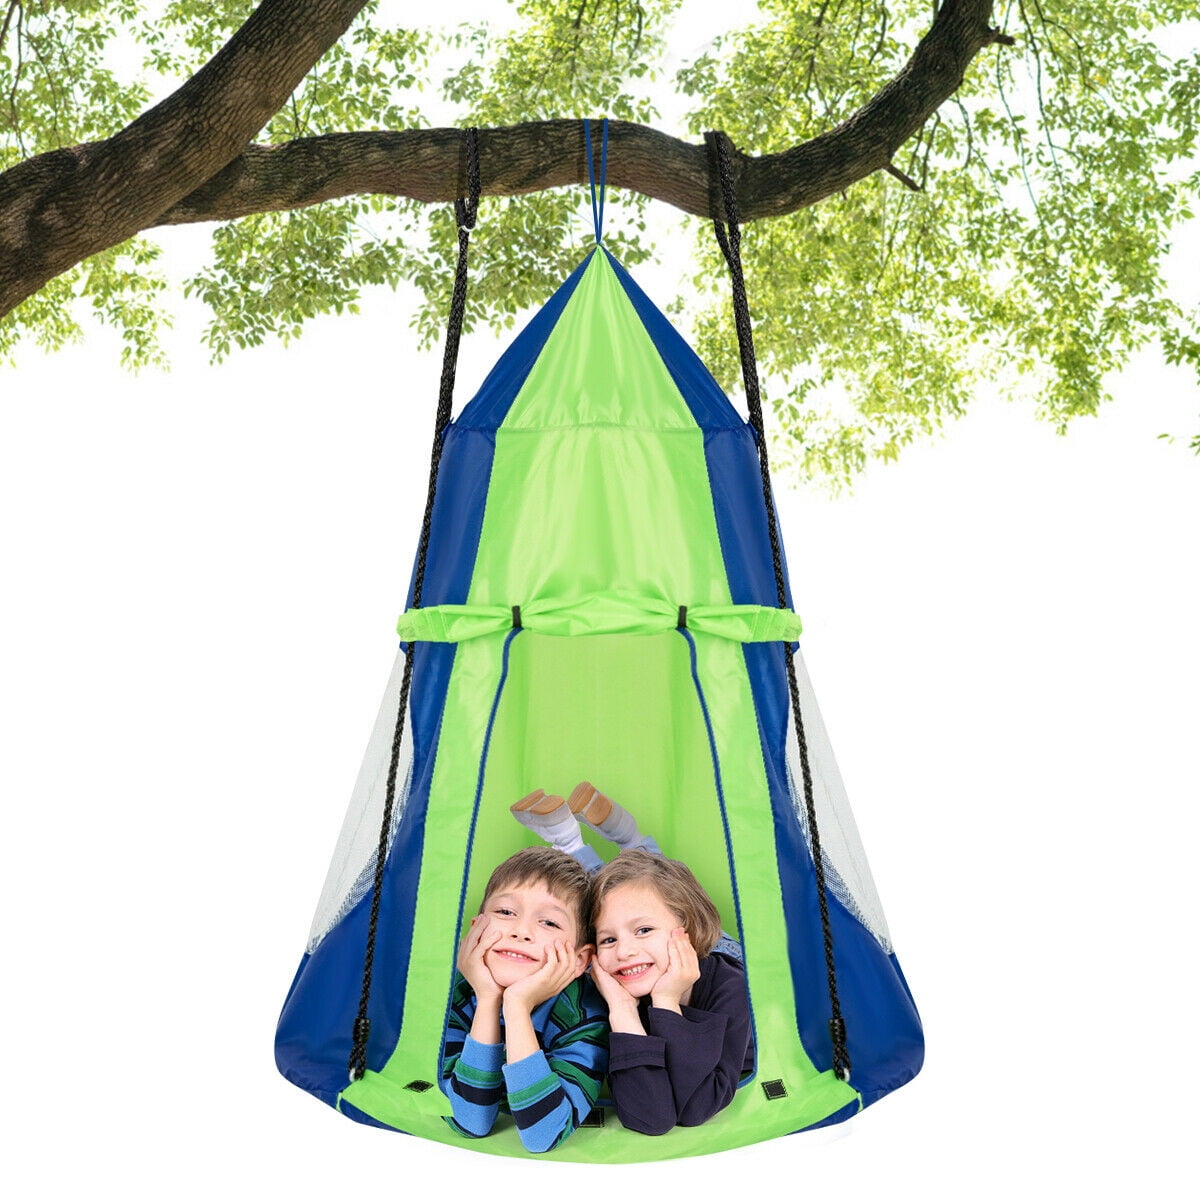 Hammock Kids Tree Hanging Tent Porch Swing Seat Patio Camping In/Outdoor W/Strap 